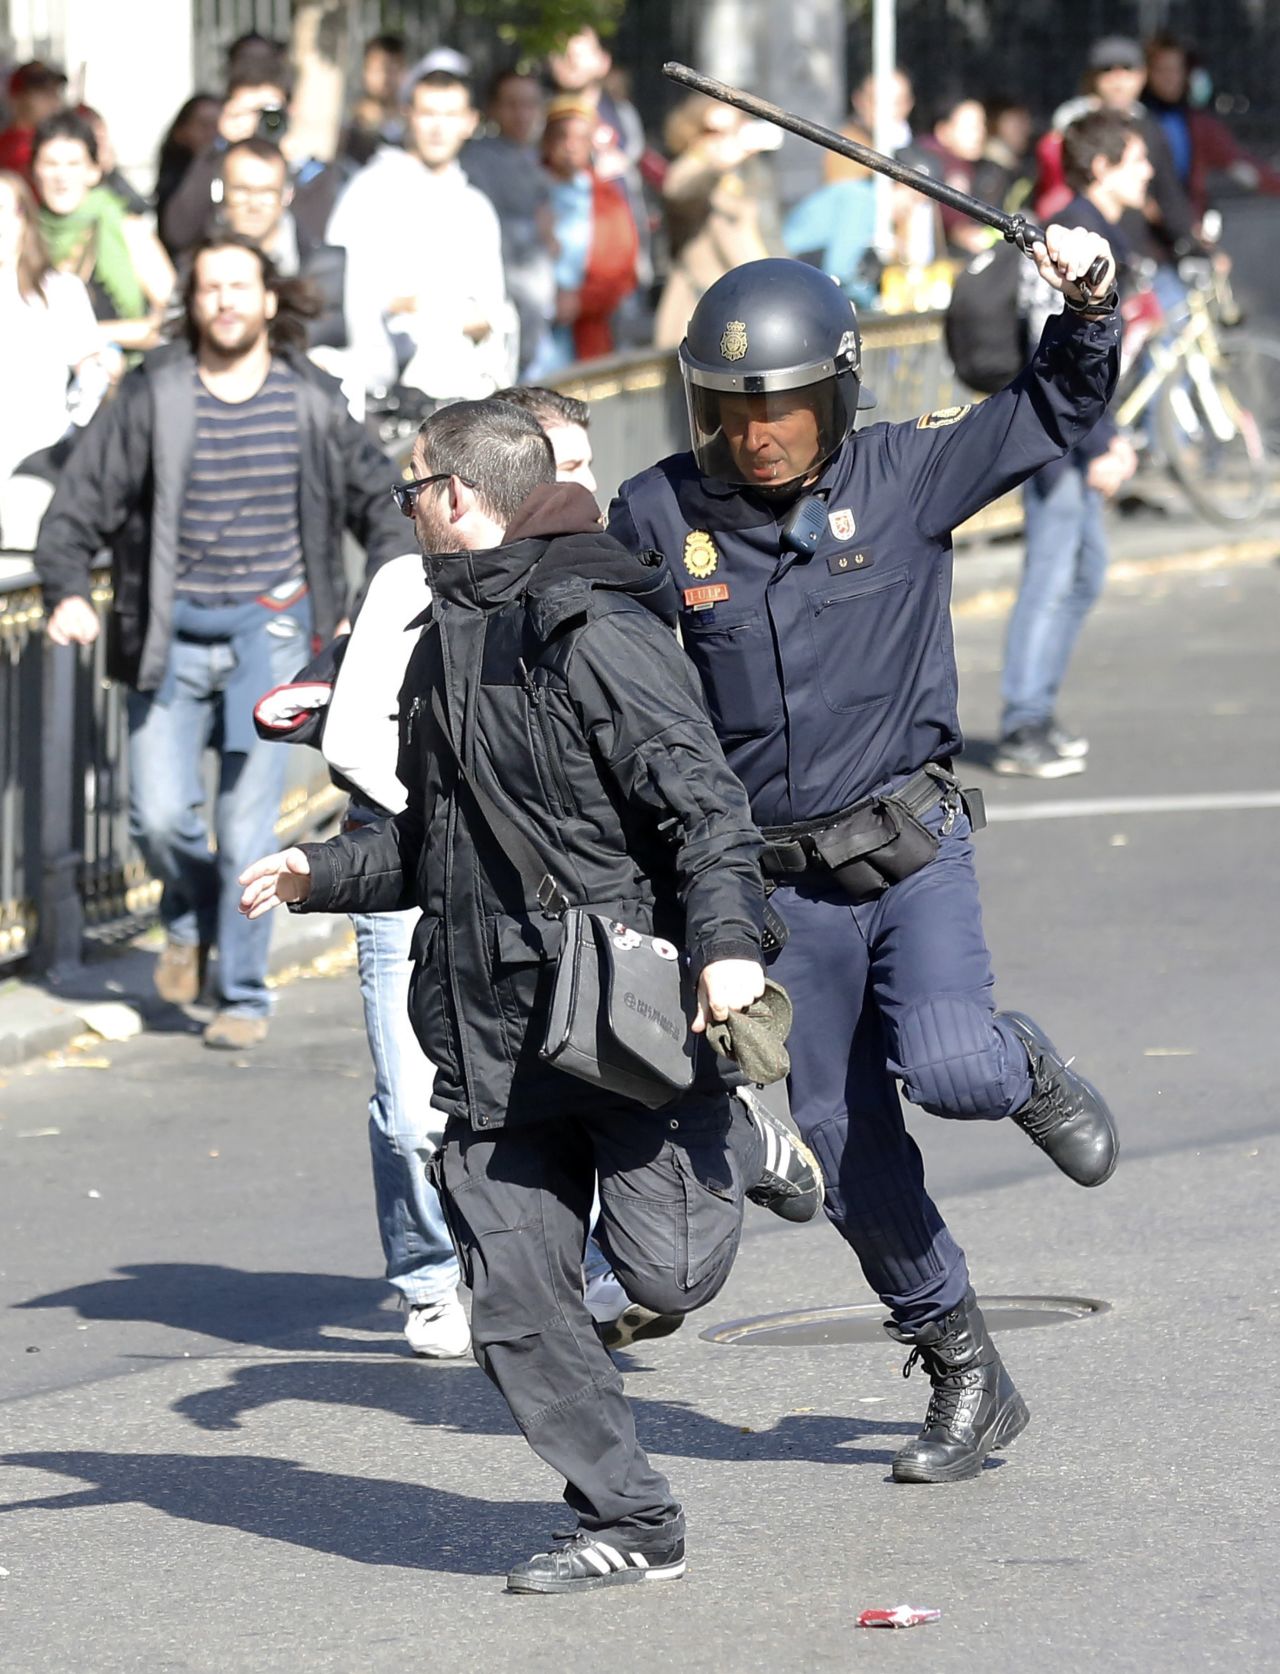 A riot policeman runs after a protester at Cibeles Square in Madrid.